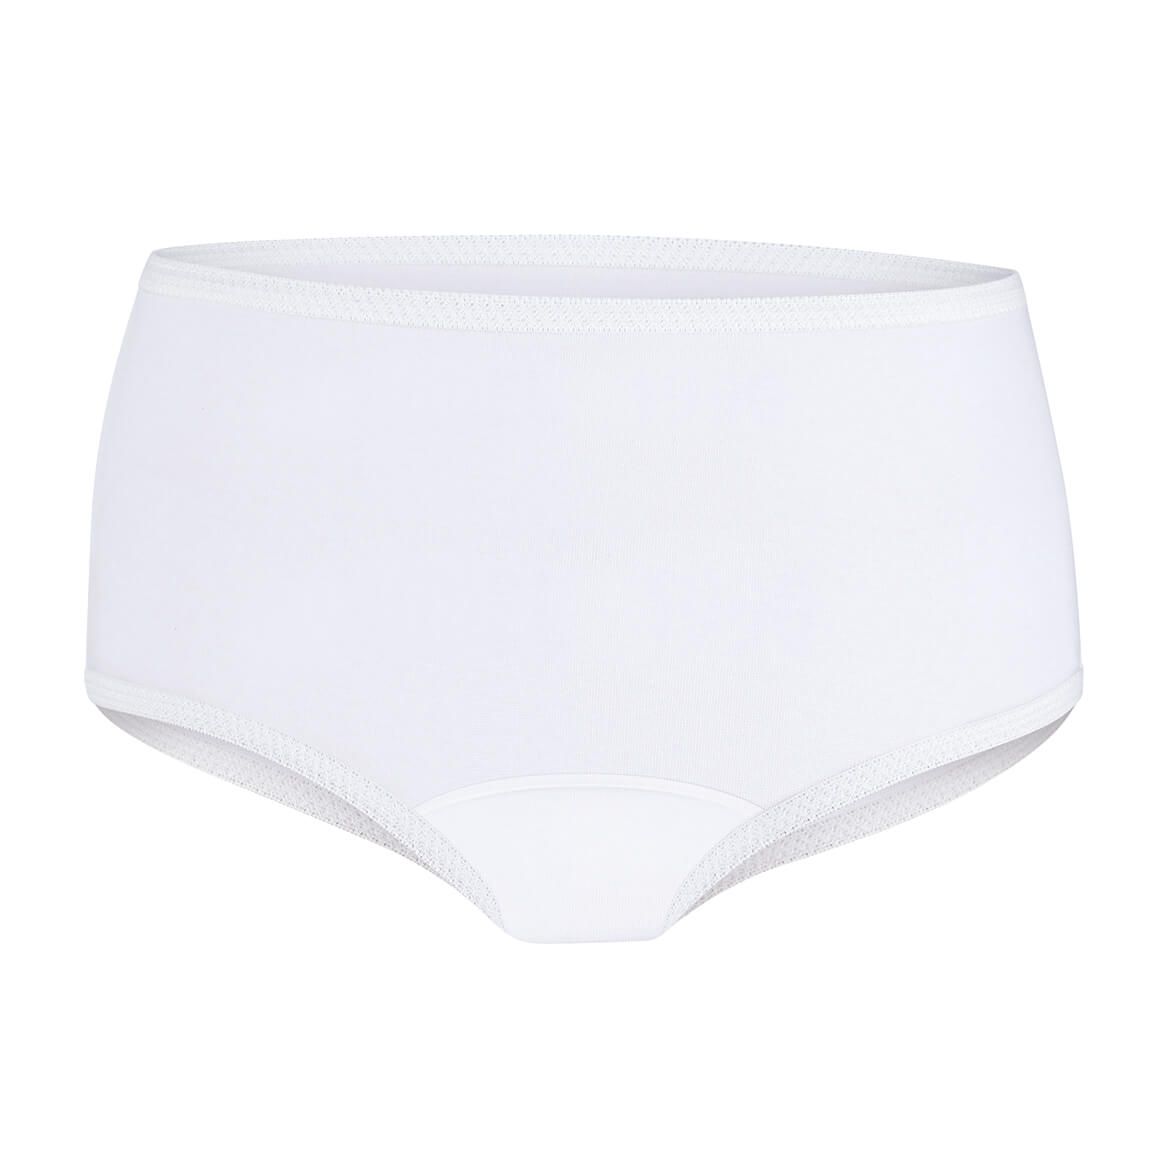 Incontinence Underpants Ladies Super Absorbency S/3 + '-' + 370072